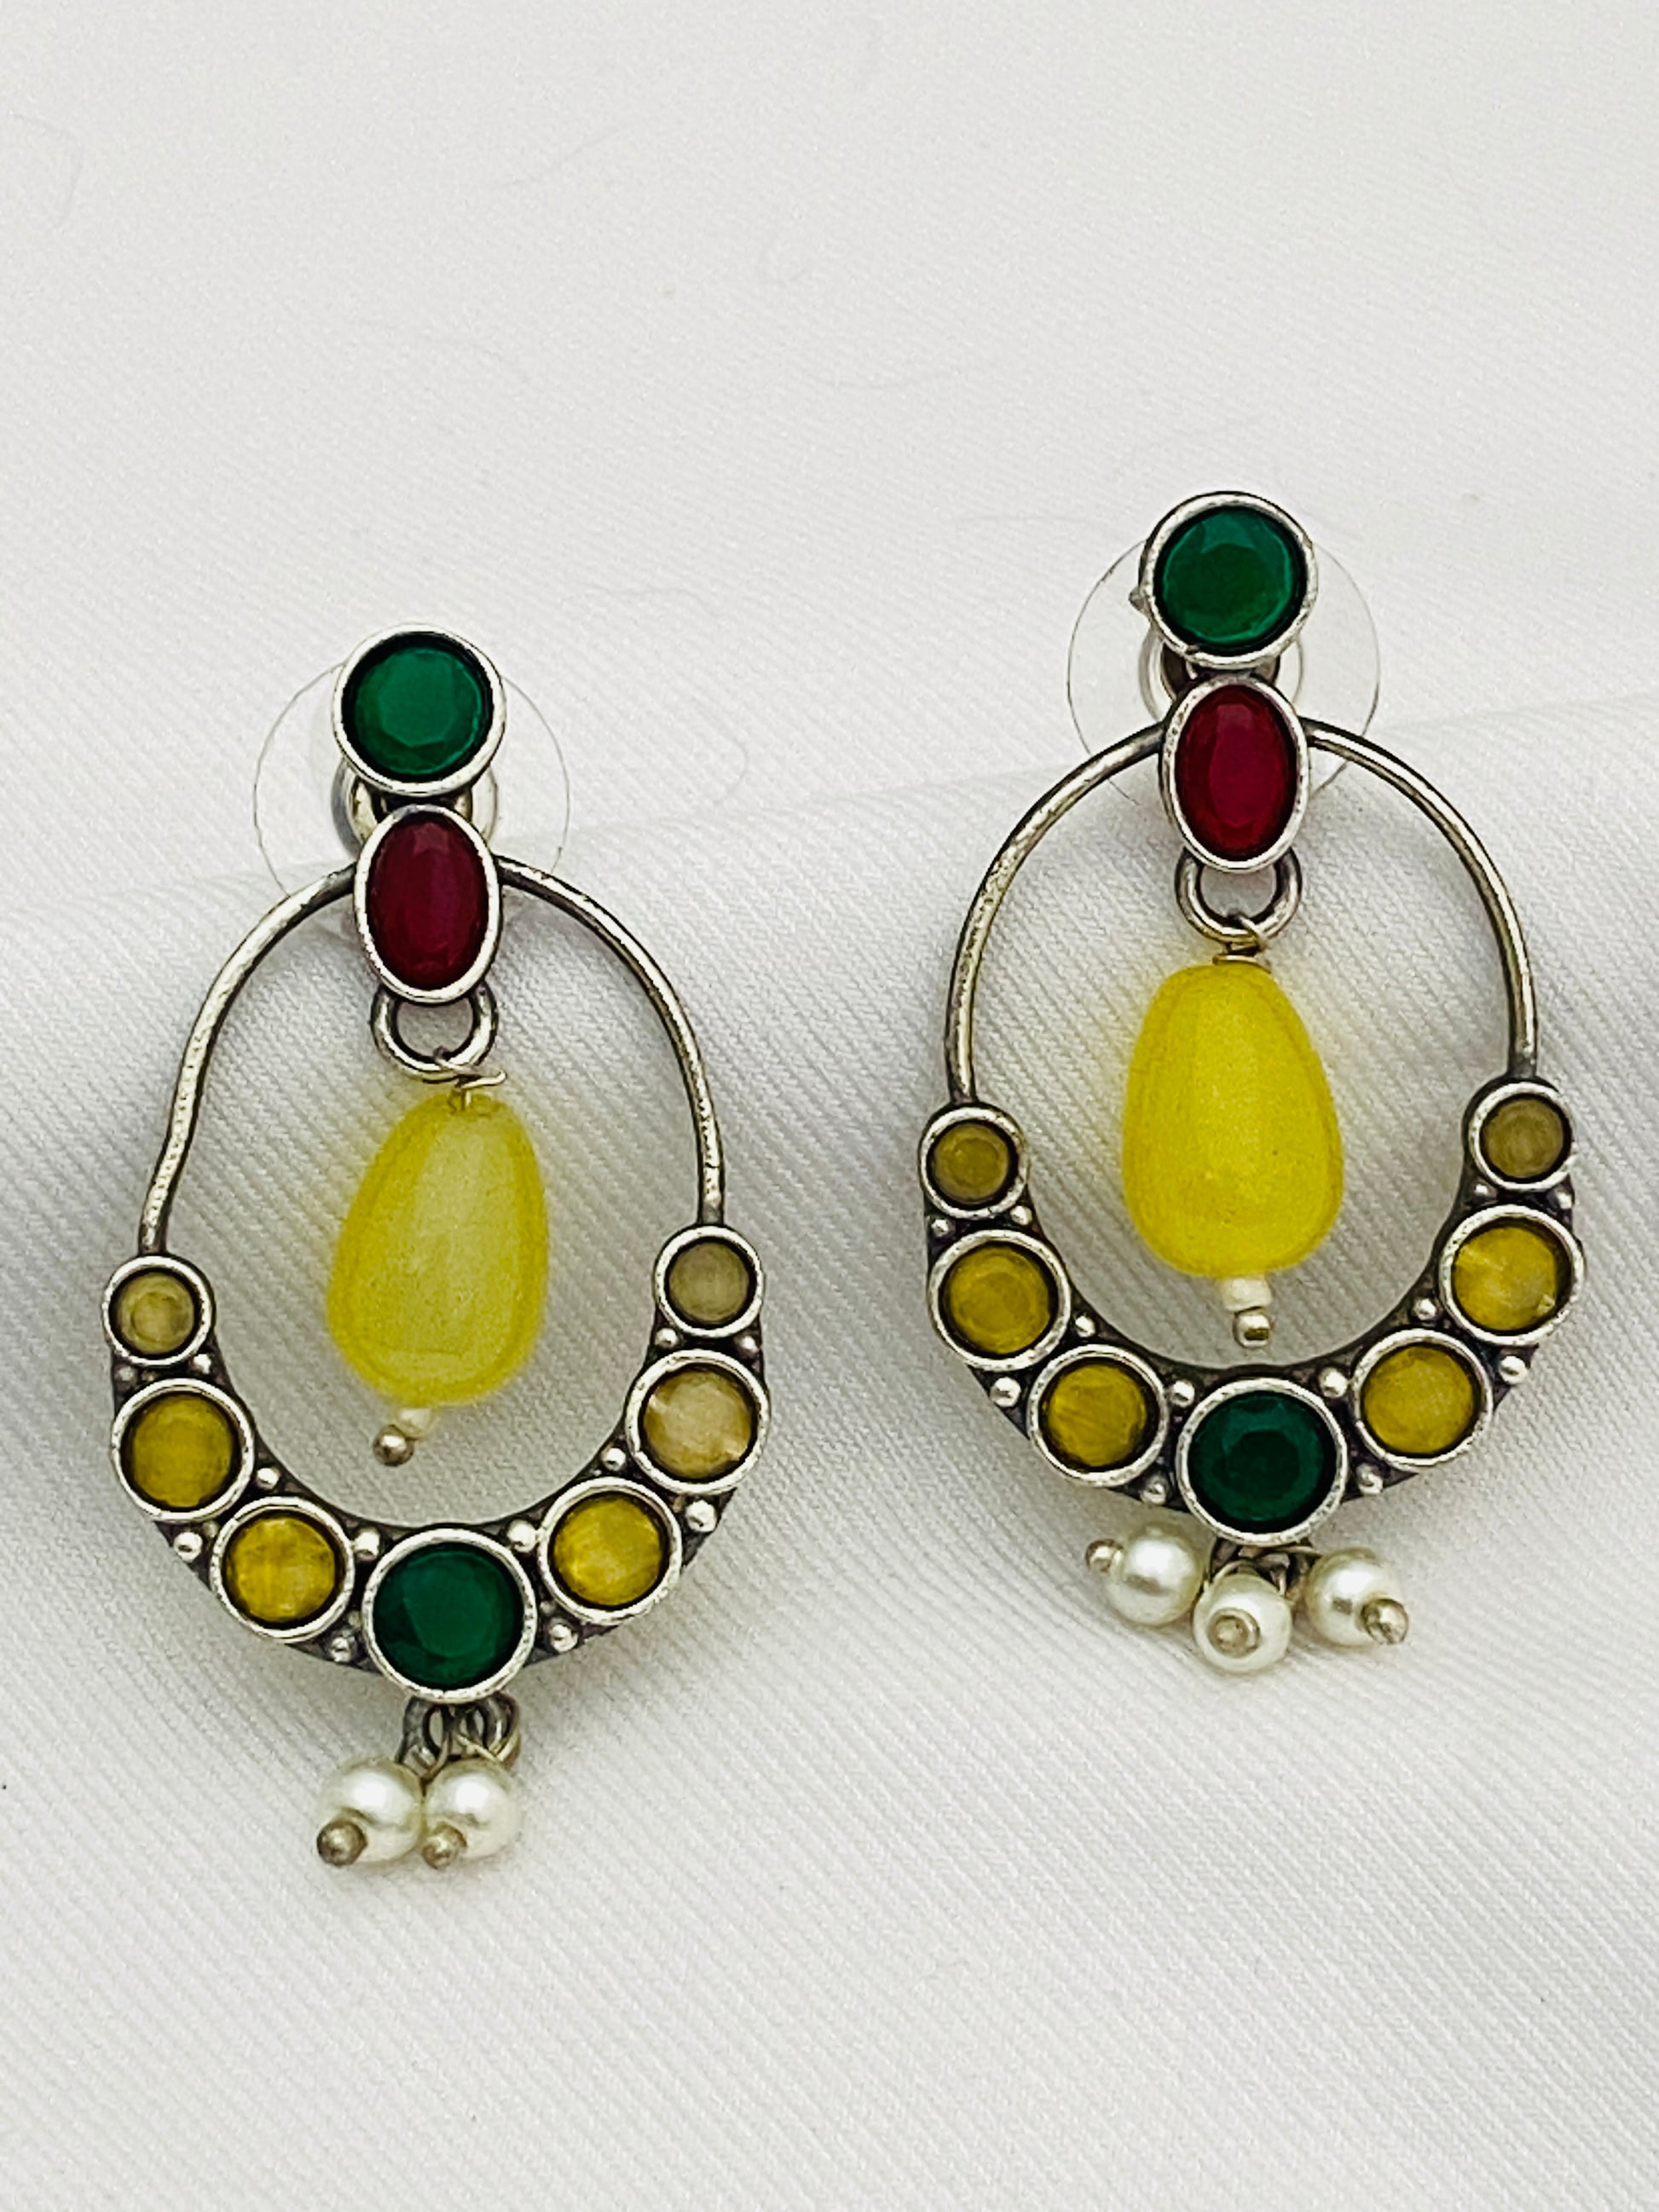 Gorgeous Oval Shaped German Silver Plated Oxidized Yellow Drops Earrings With Pearl Beads